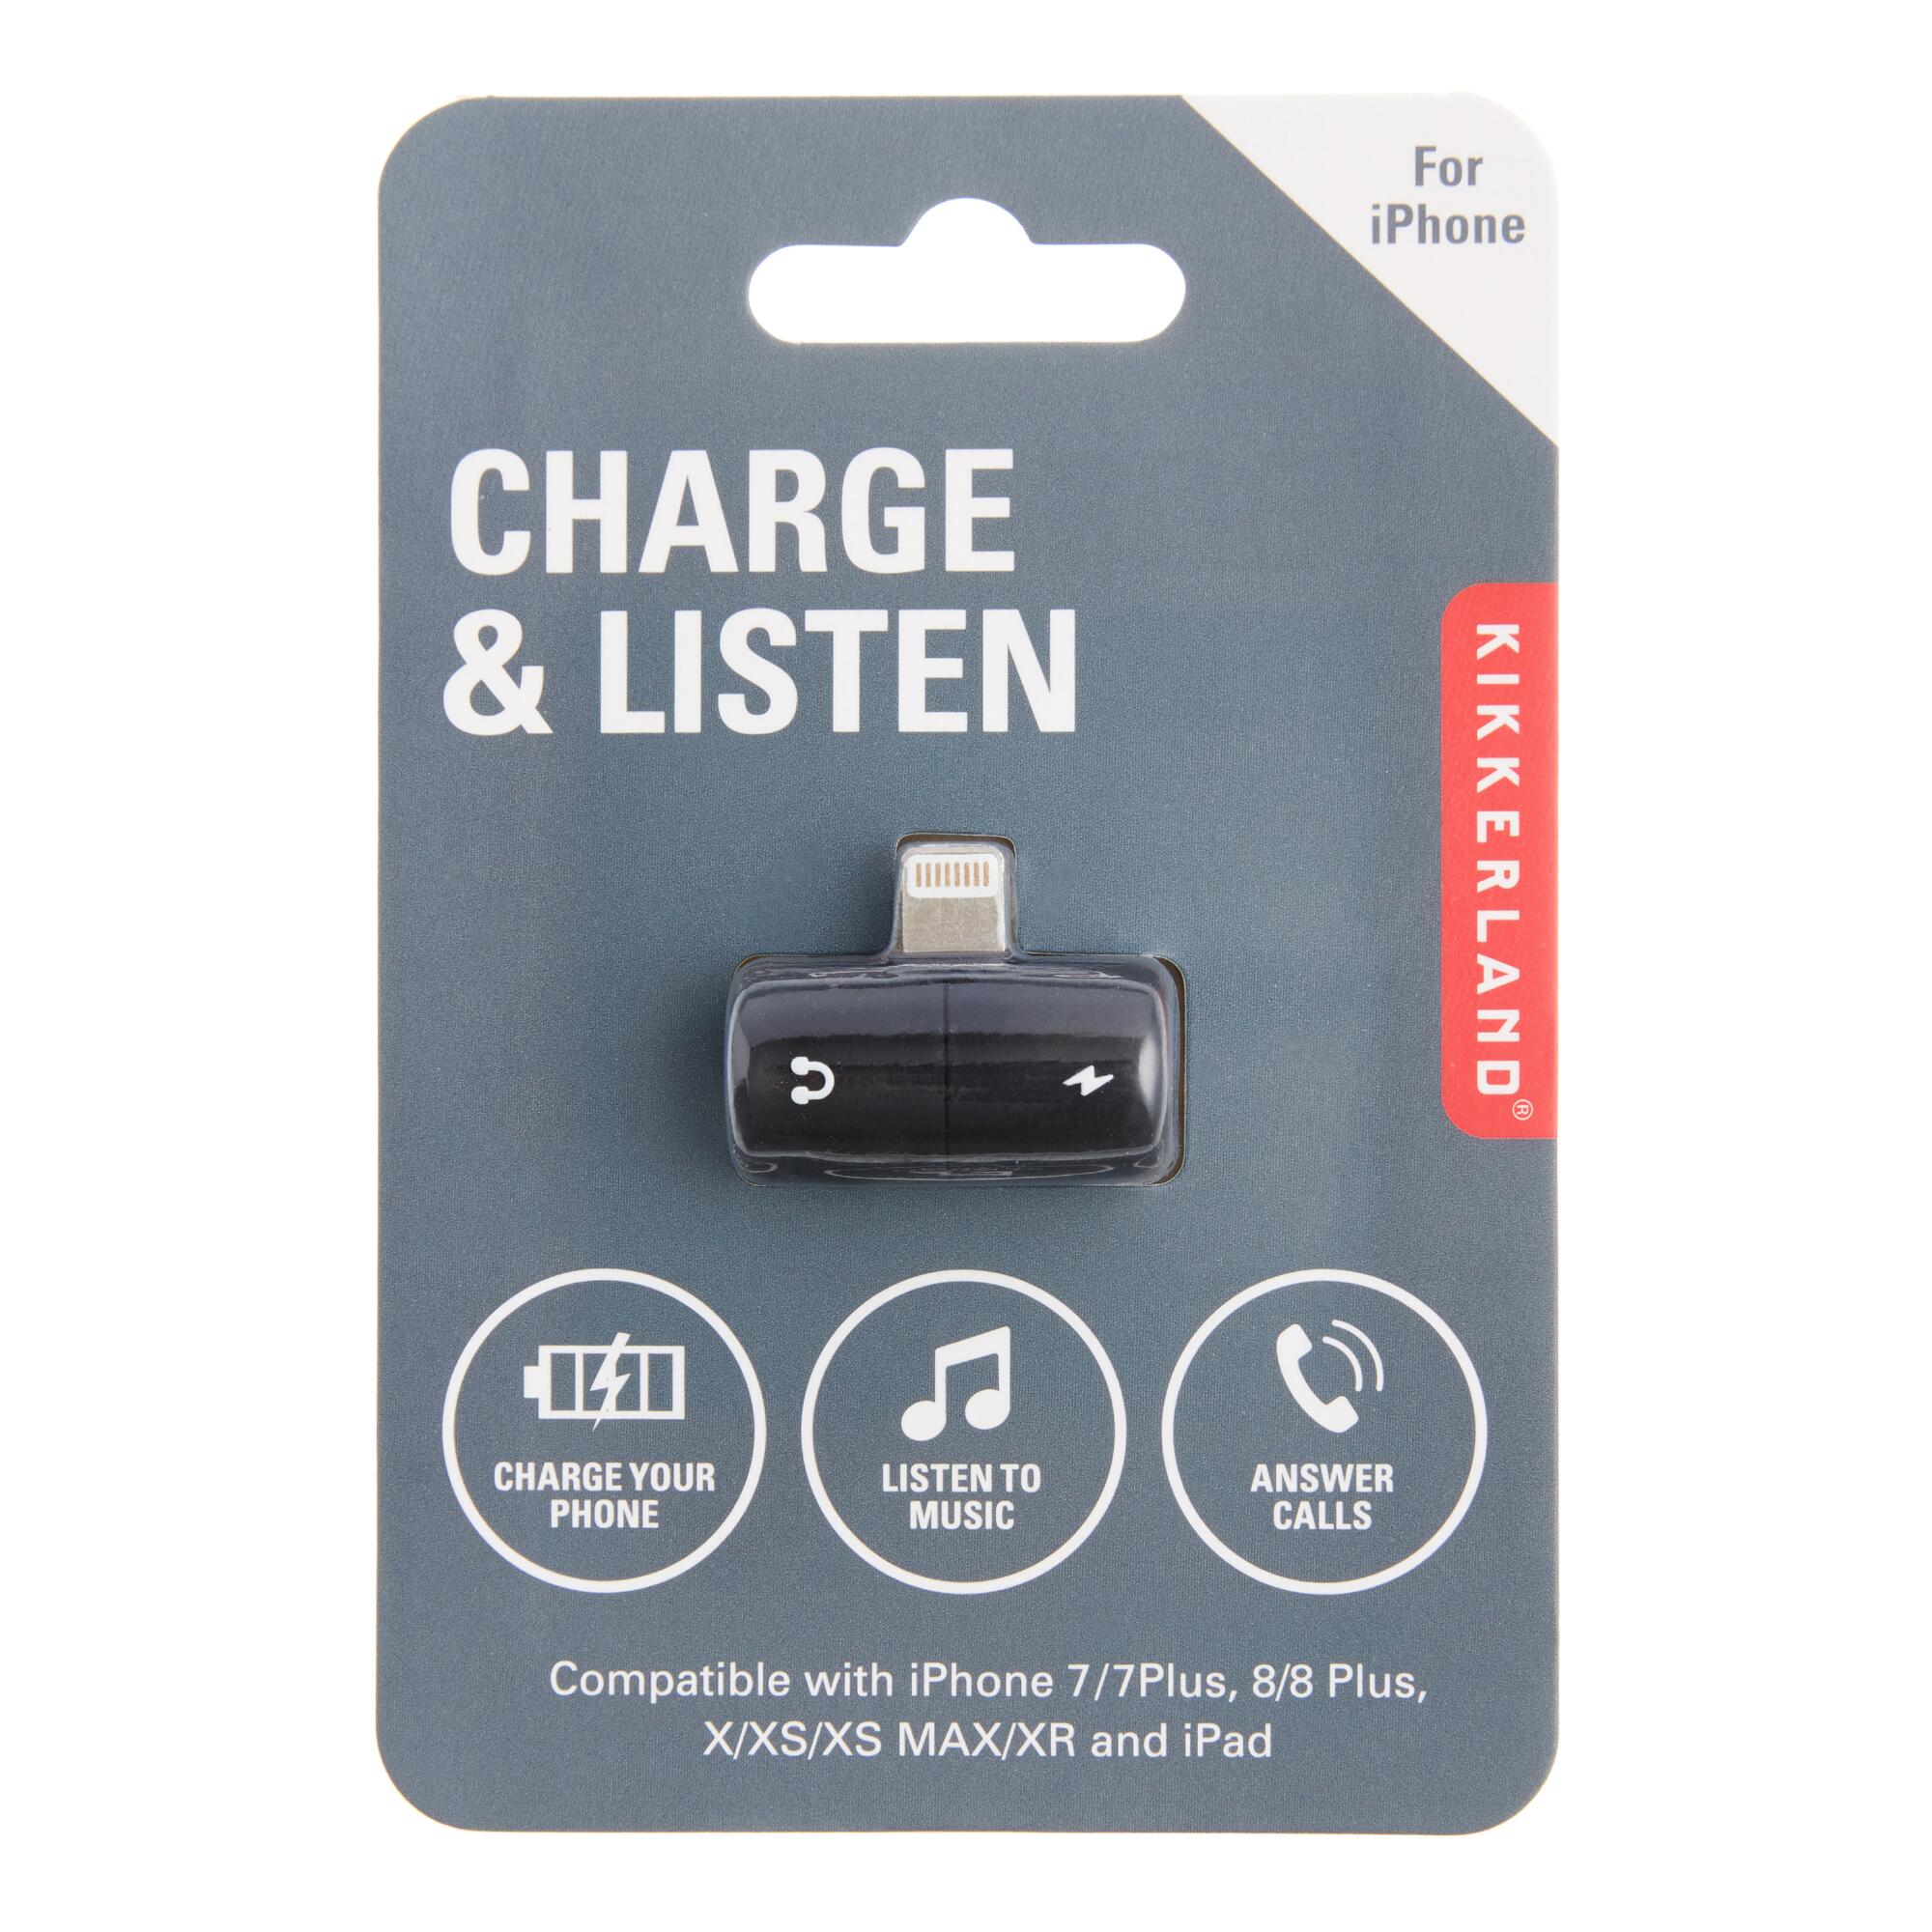 Kikkerland 2 in 1 iPhone Charger and Headphone Port by World Market